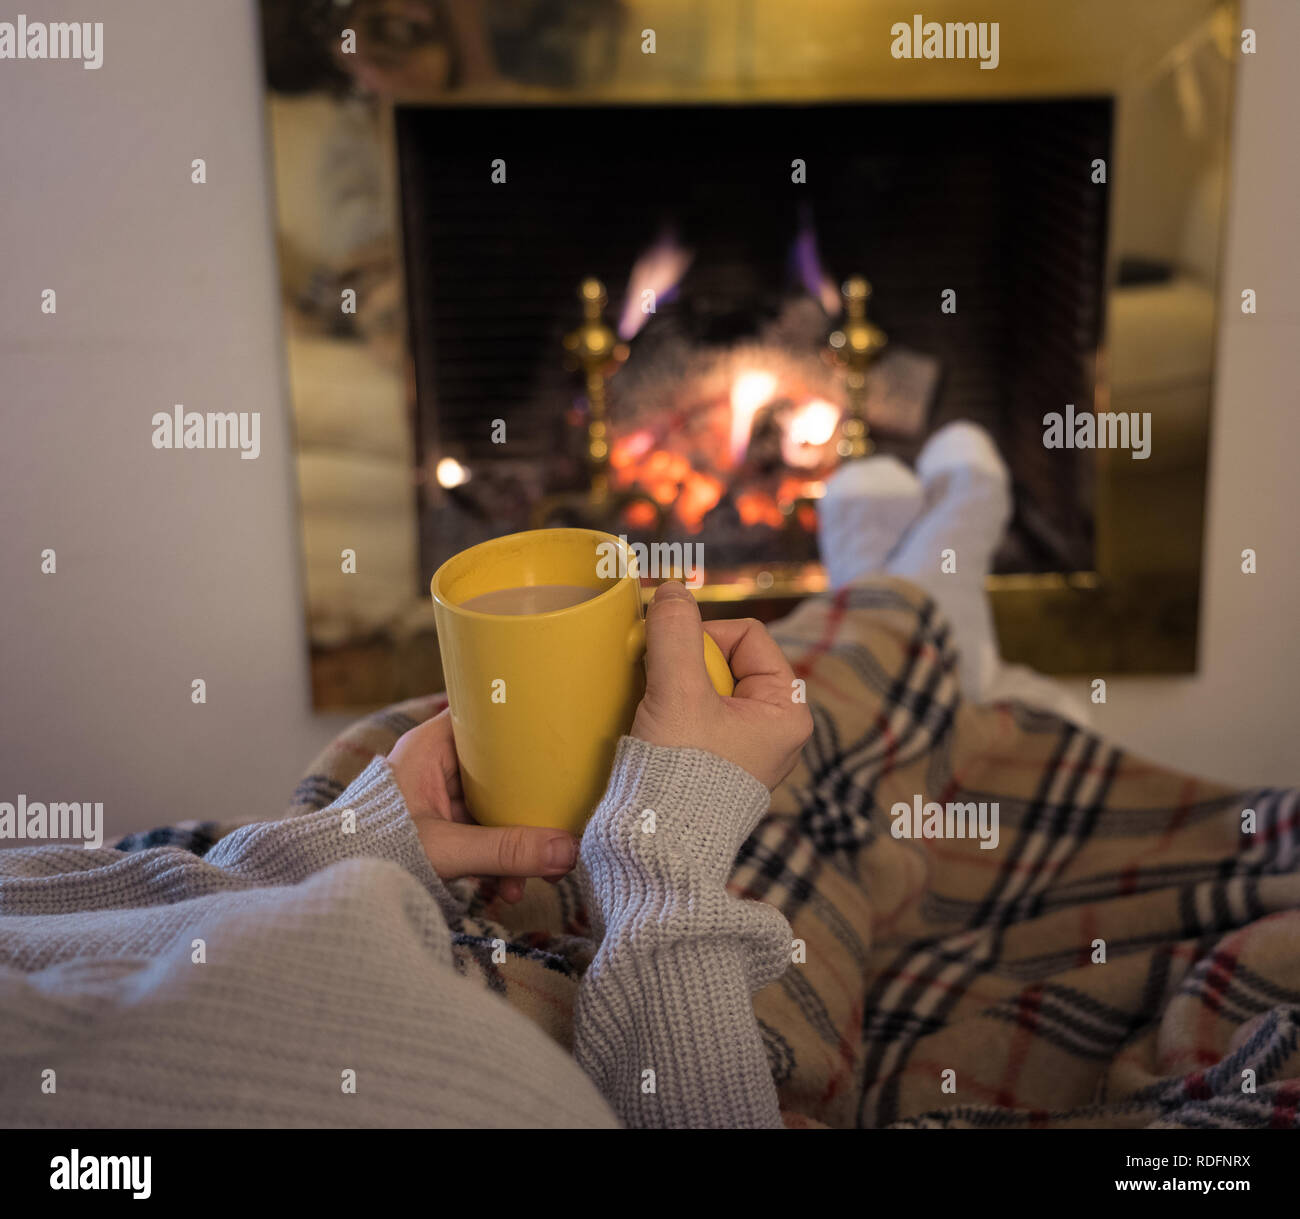 Close up image of woman sitting under the blanket by cozy fireplace warming up her feet in woolen socks relaxing with cup of hot chocolate drink at ho Stock Photo